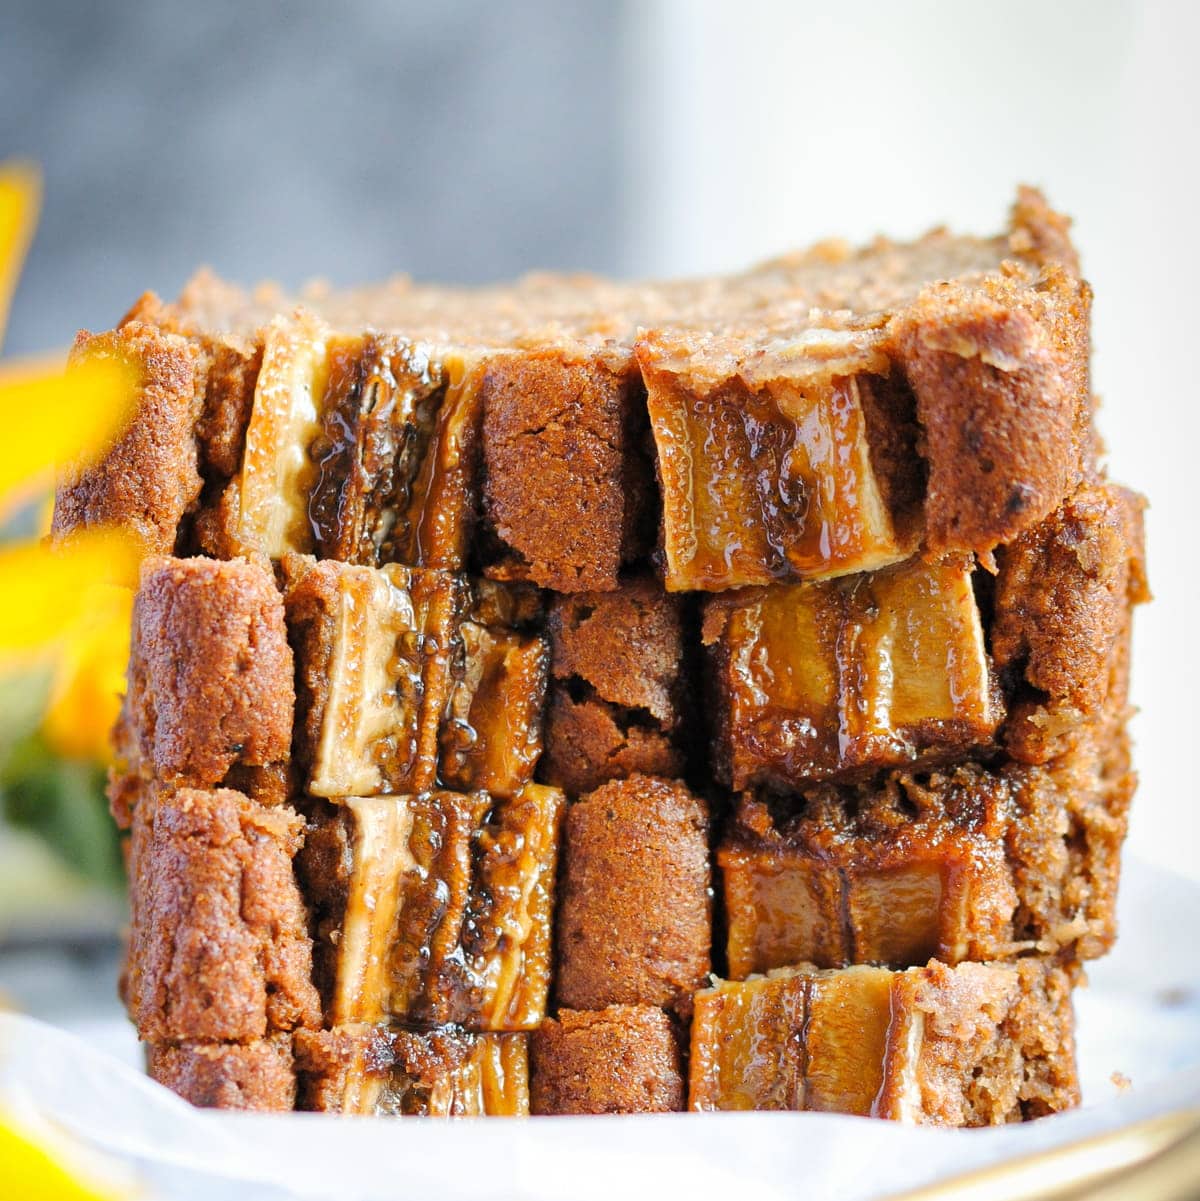 Slices of Vegan Blender Banana Bread stacked on top of each other with a sunflower